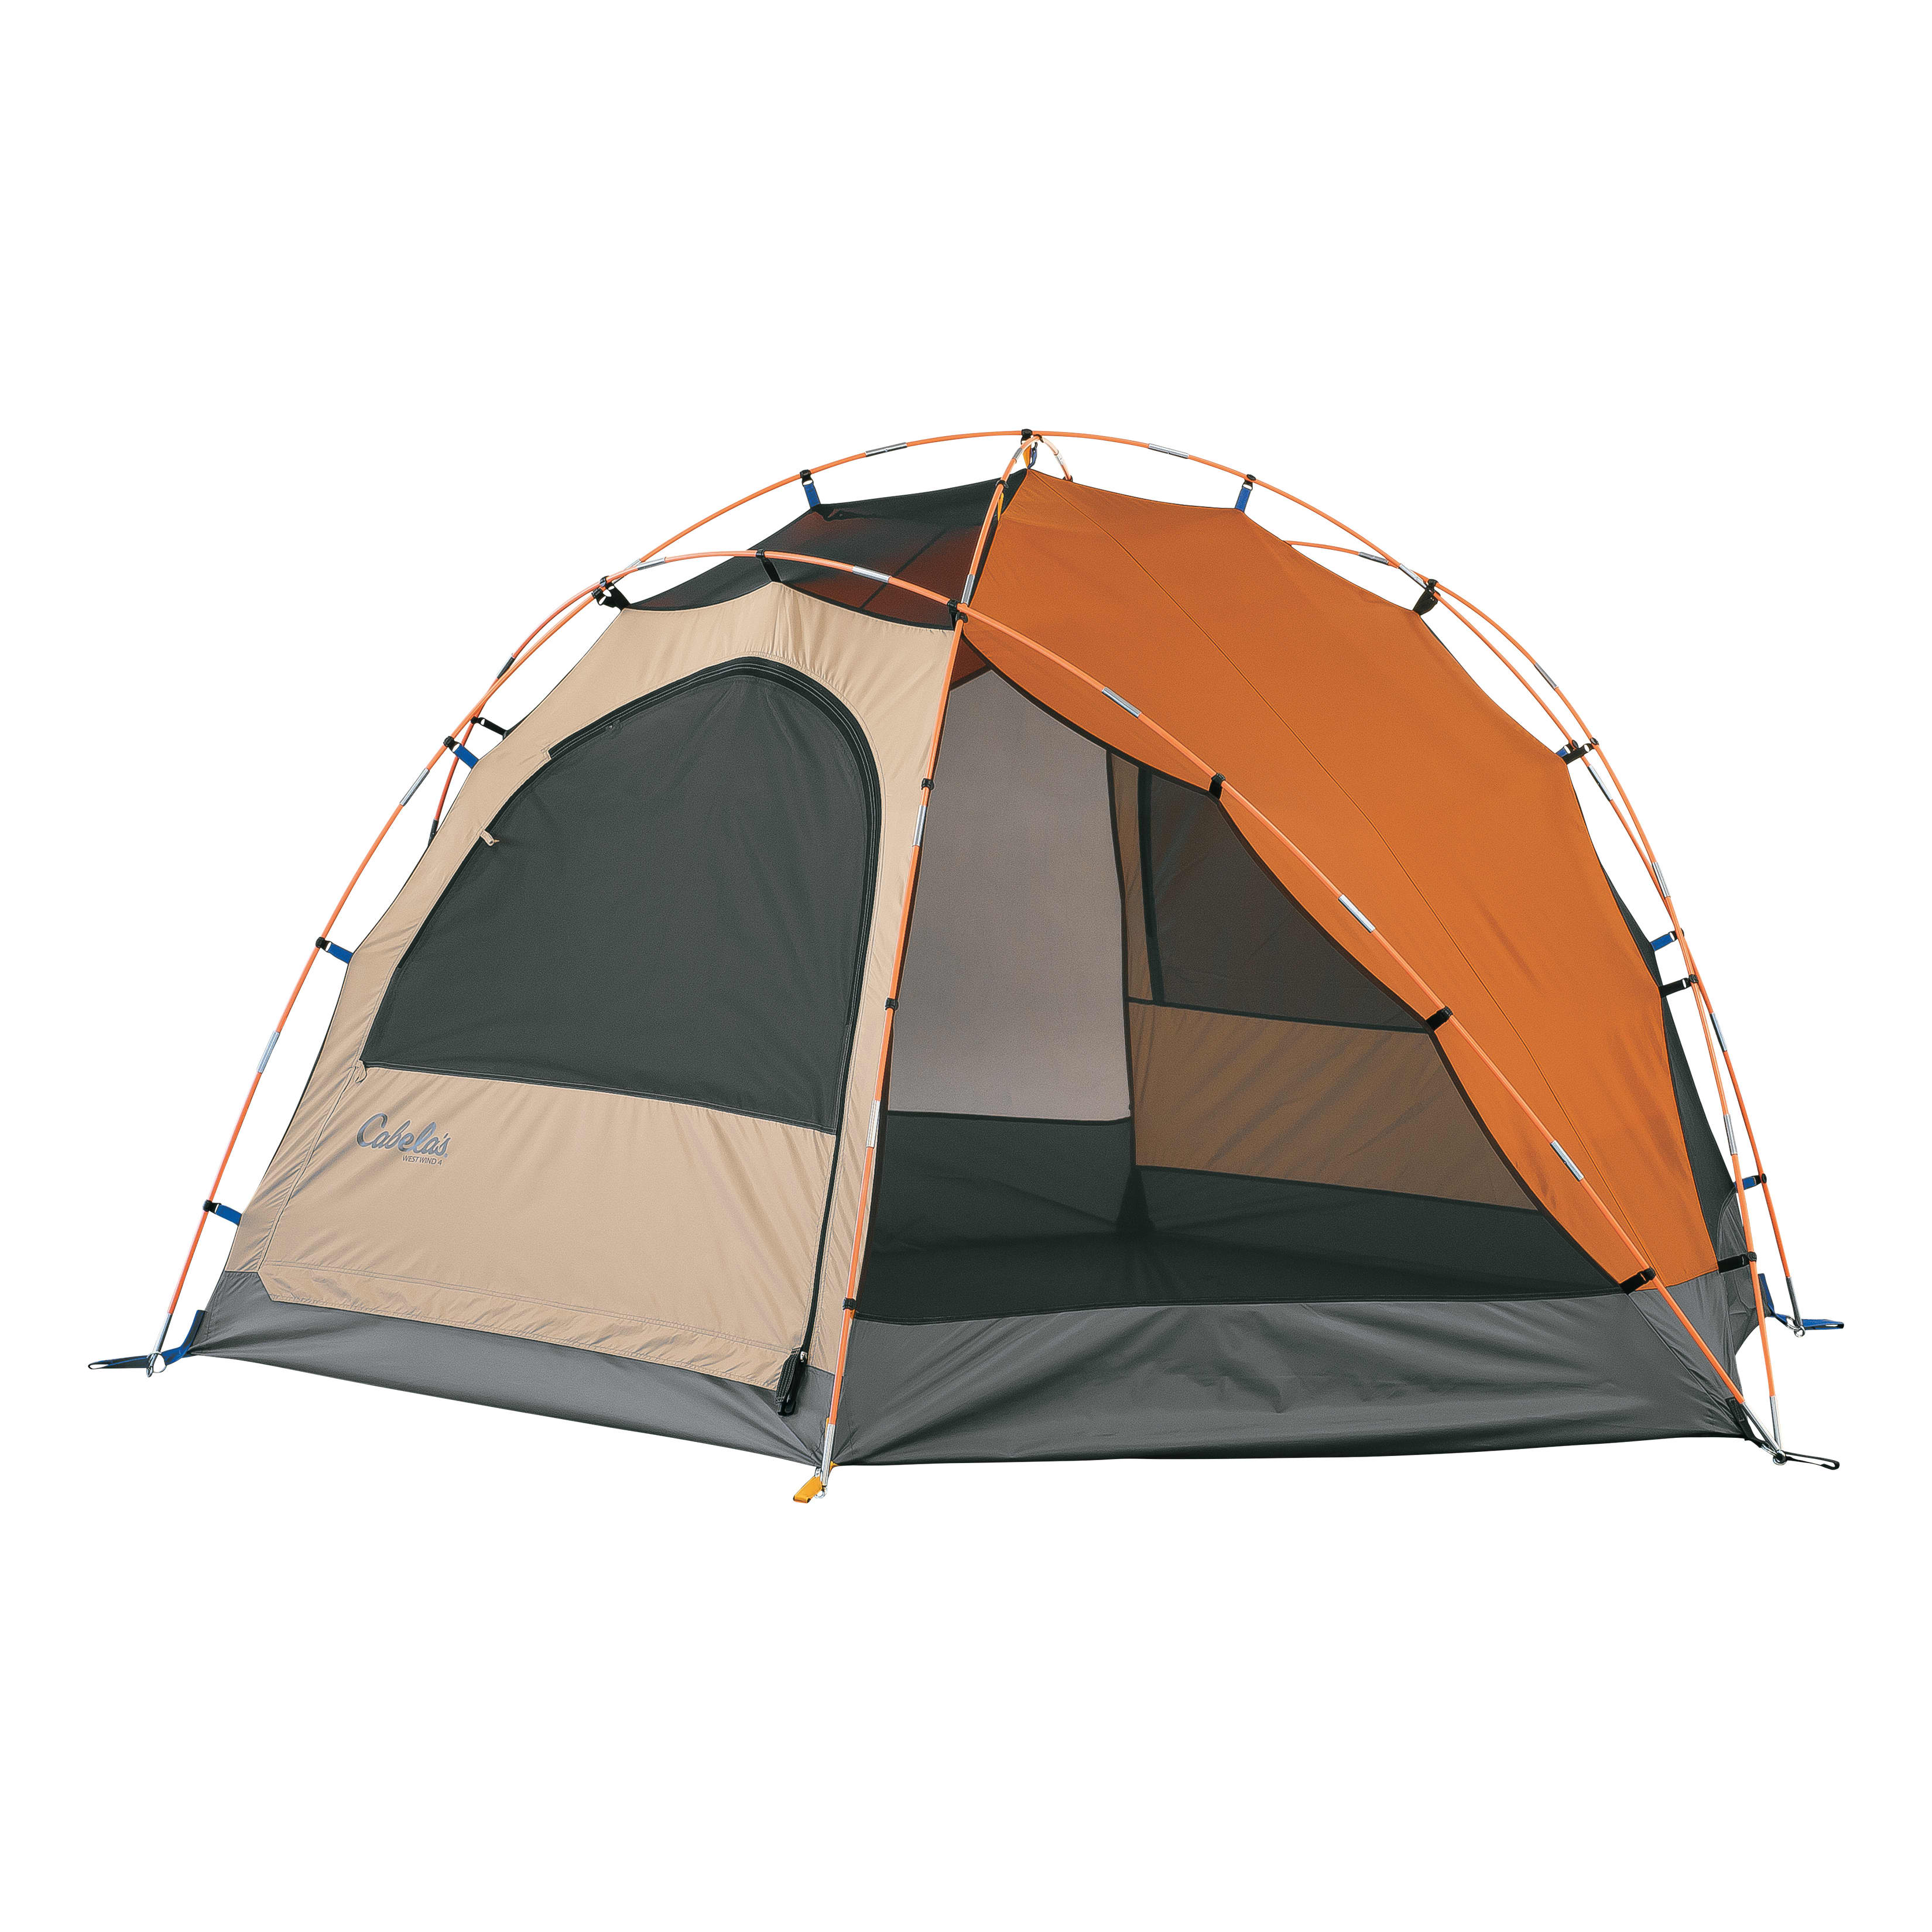 Cabela’s West Wind™ Dome Tent - Without fly - Windows closed - Orange,Cabela’s West Wind™ Dome Tent - Without fly - Windows closed - Orange